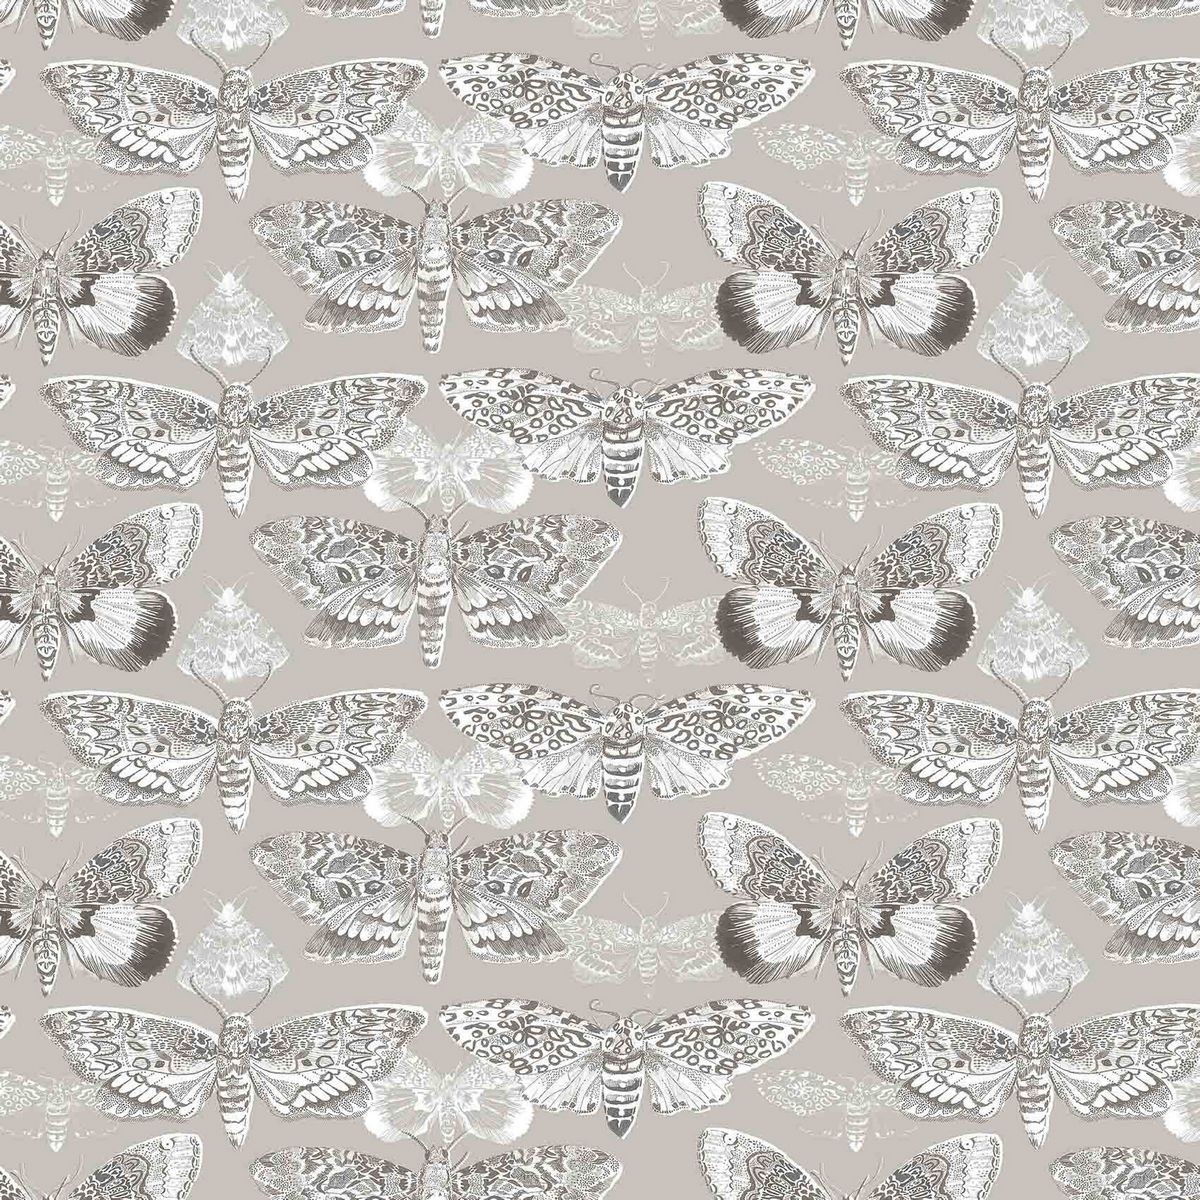 Nocturnal Sepia Fabric by Voyage Maison